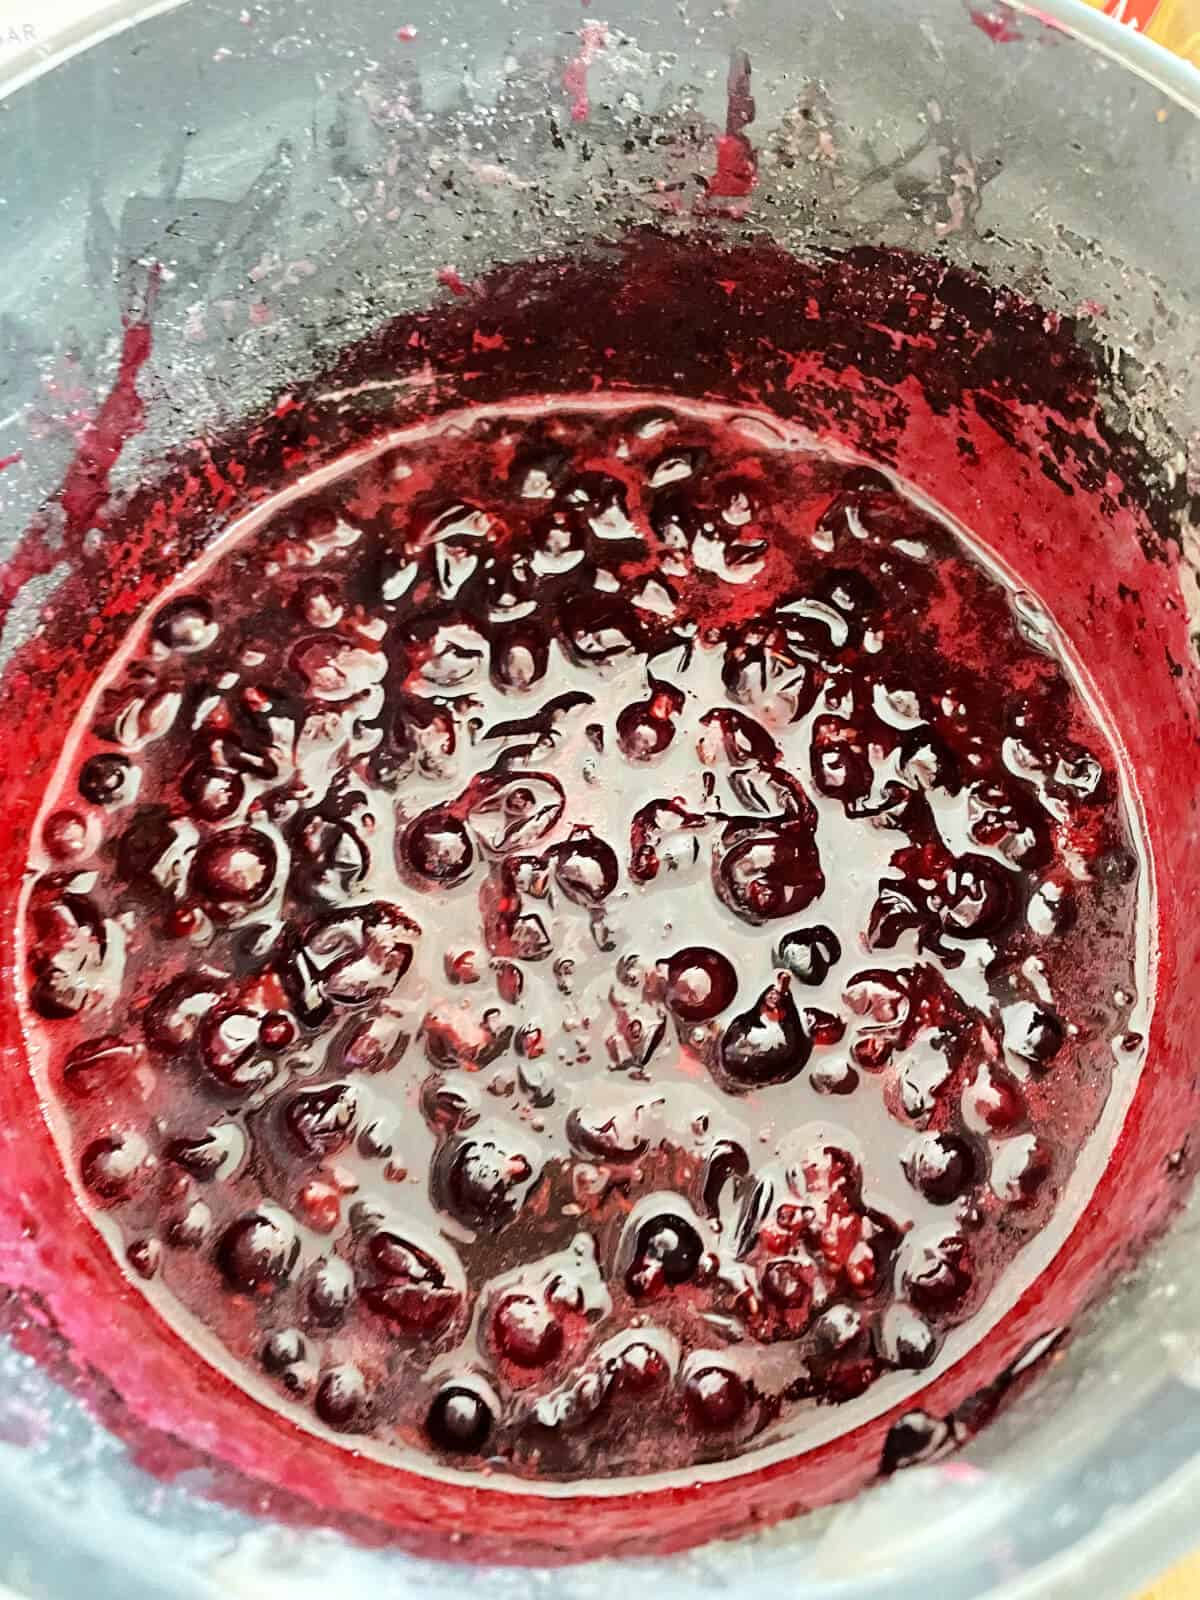 Pan of cooked blackcurrants.